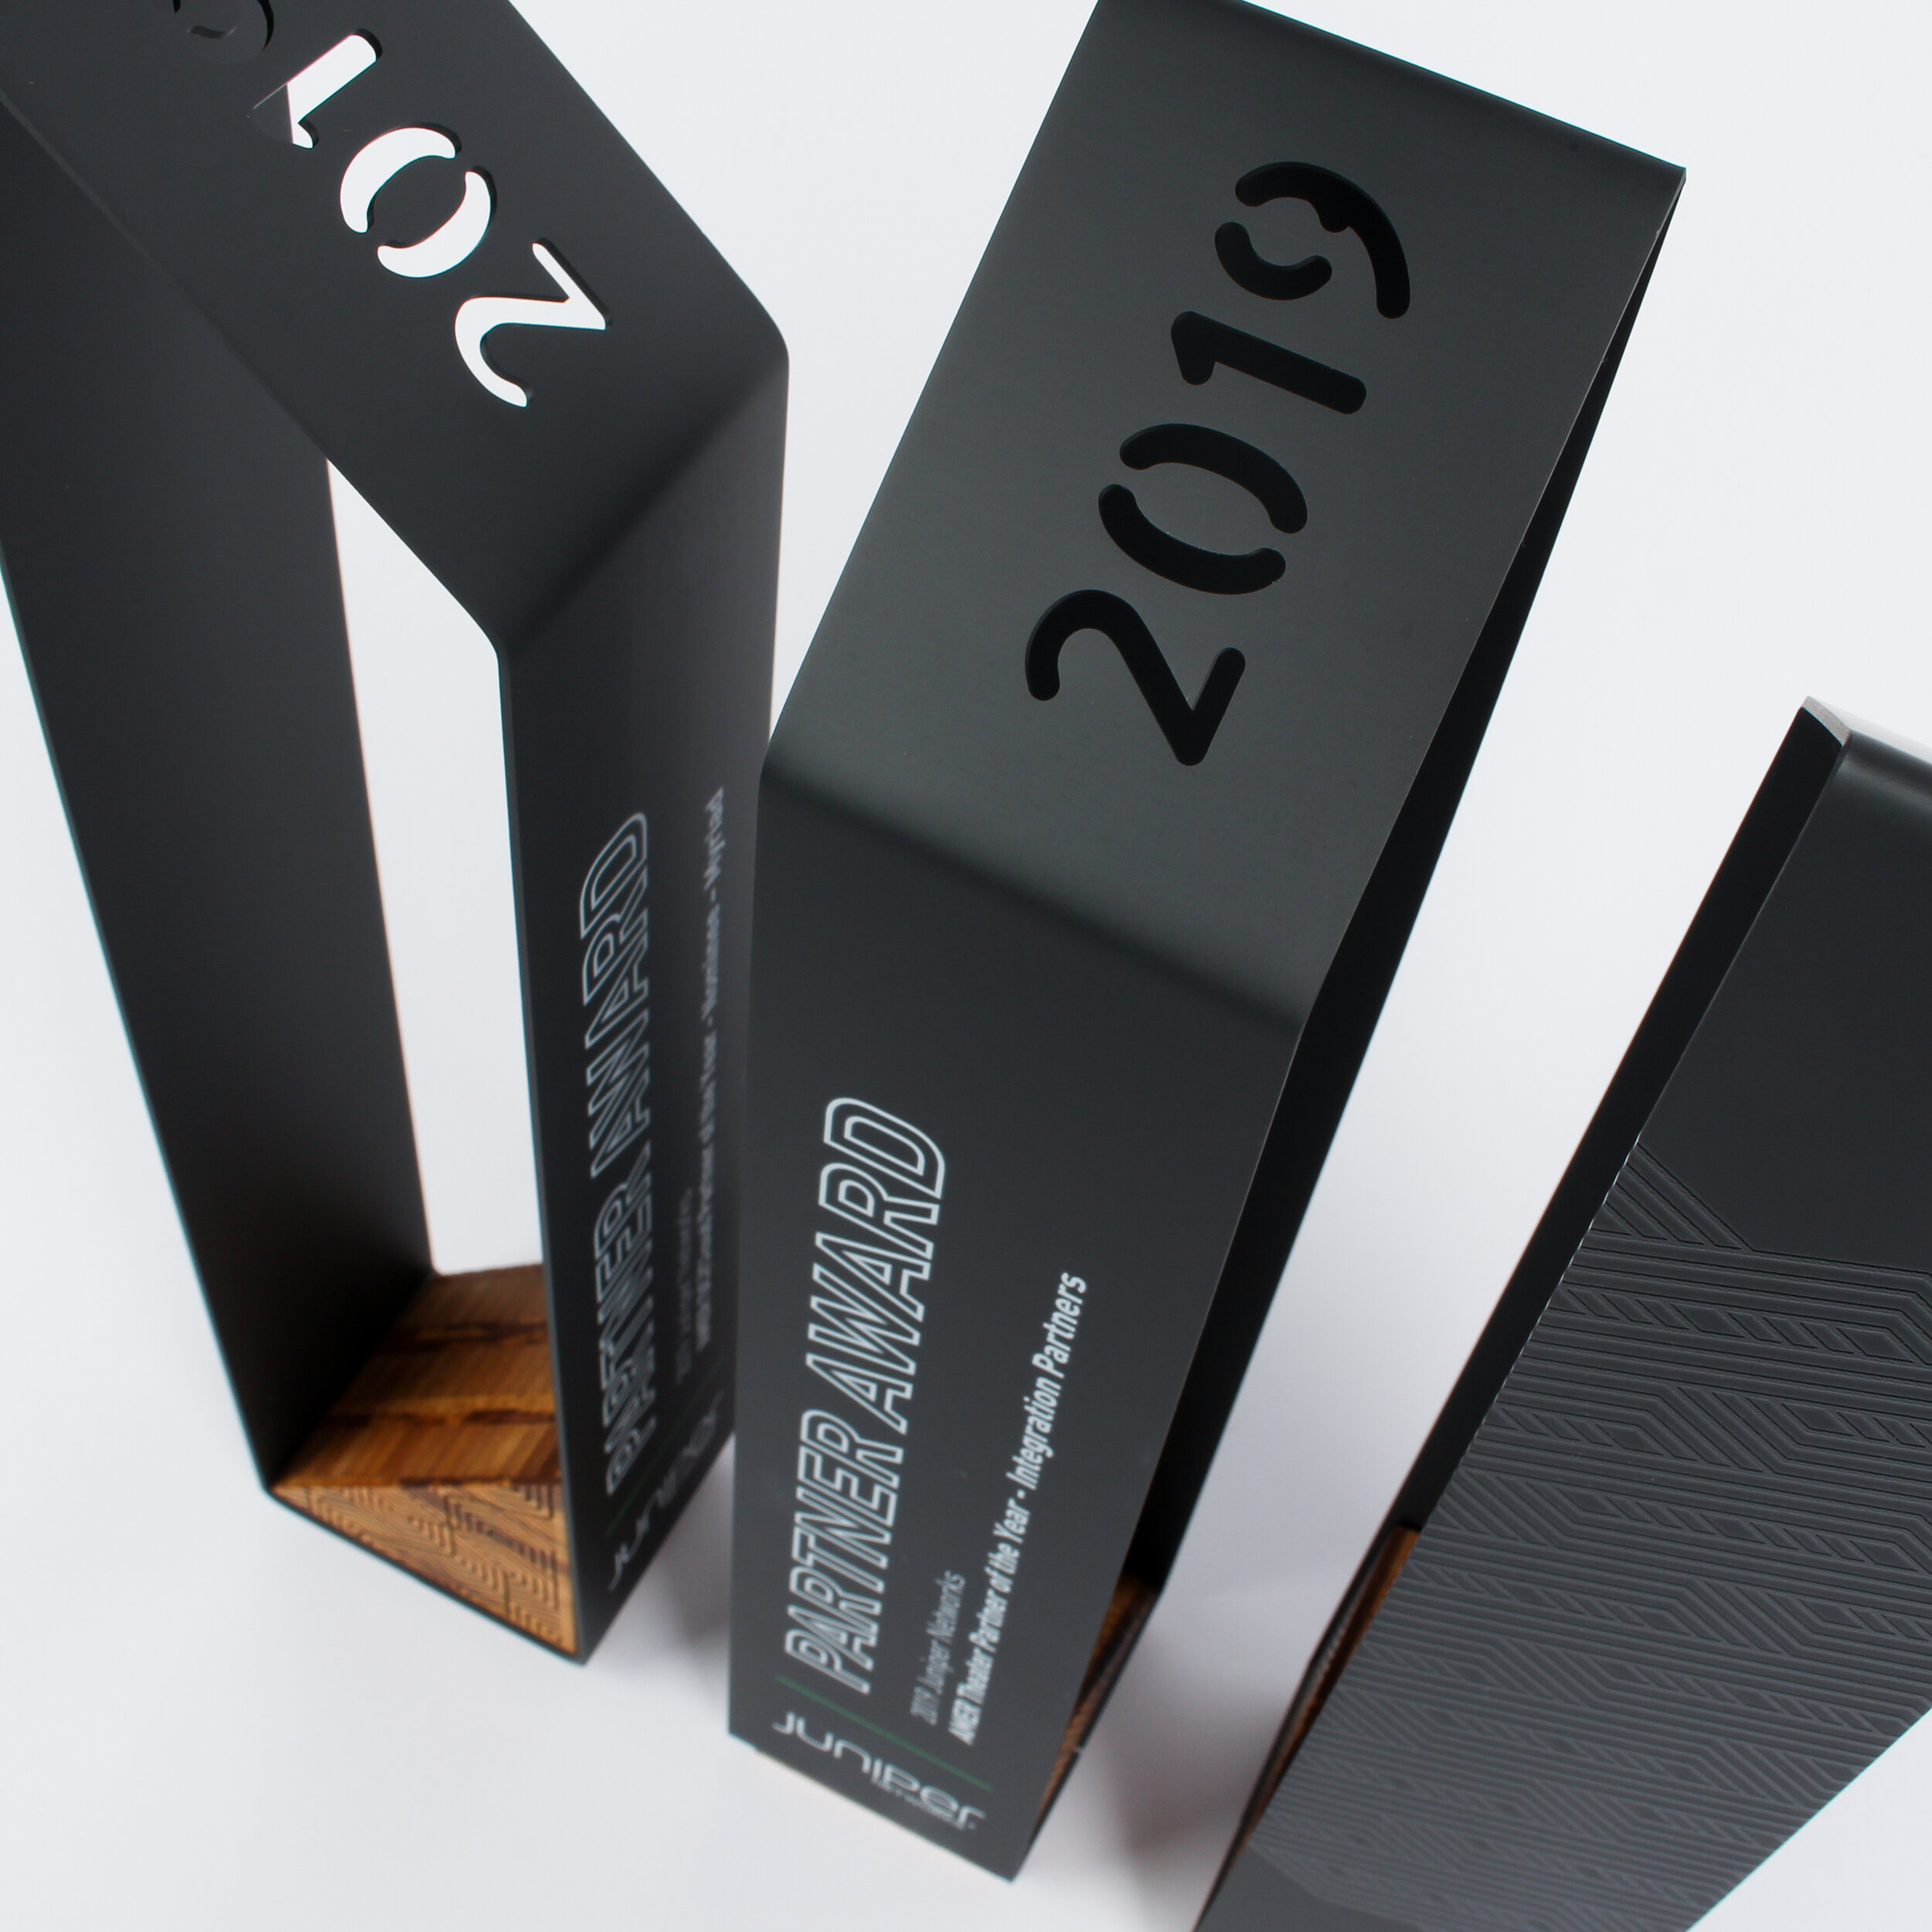 awards for association unique and modern design based on clients brand and branding 